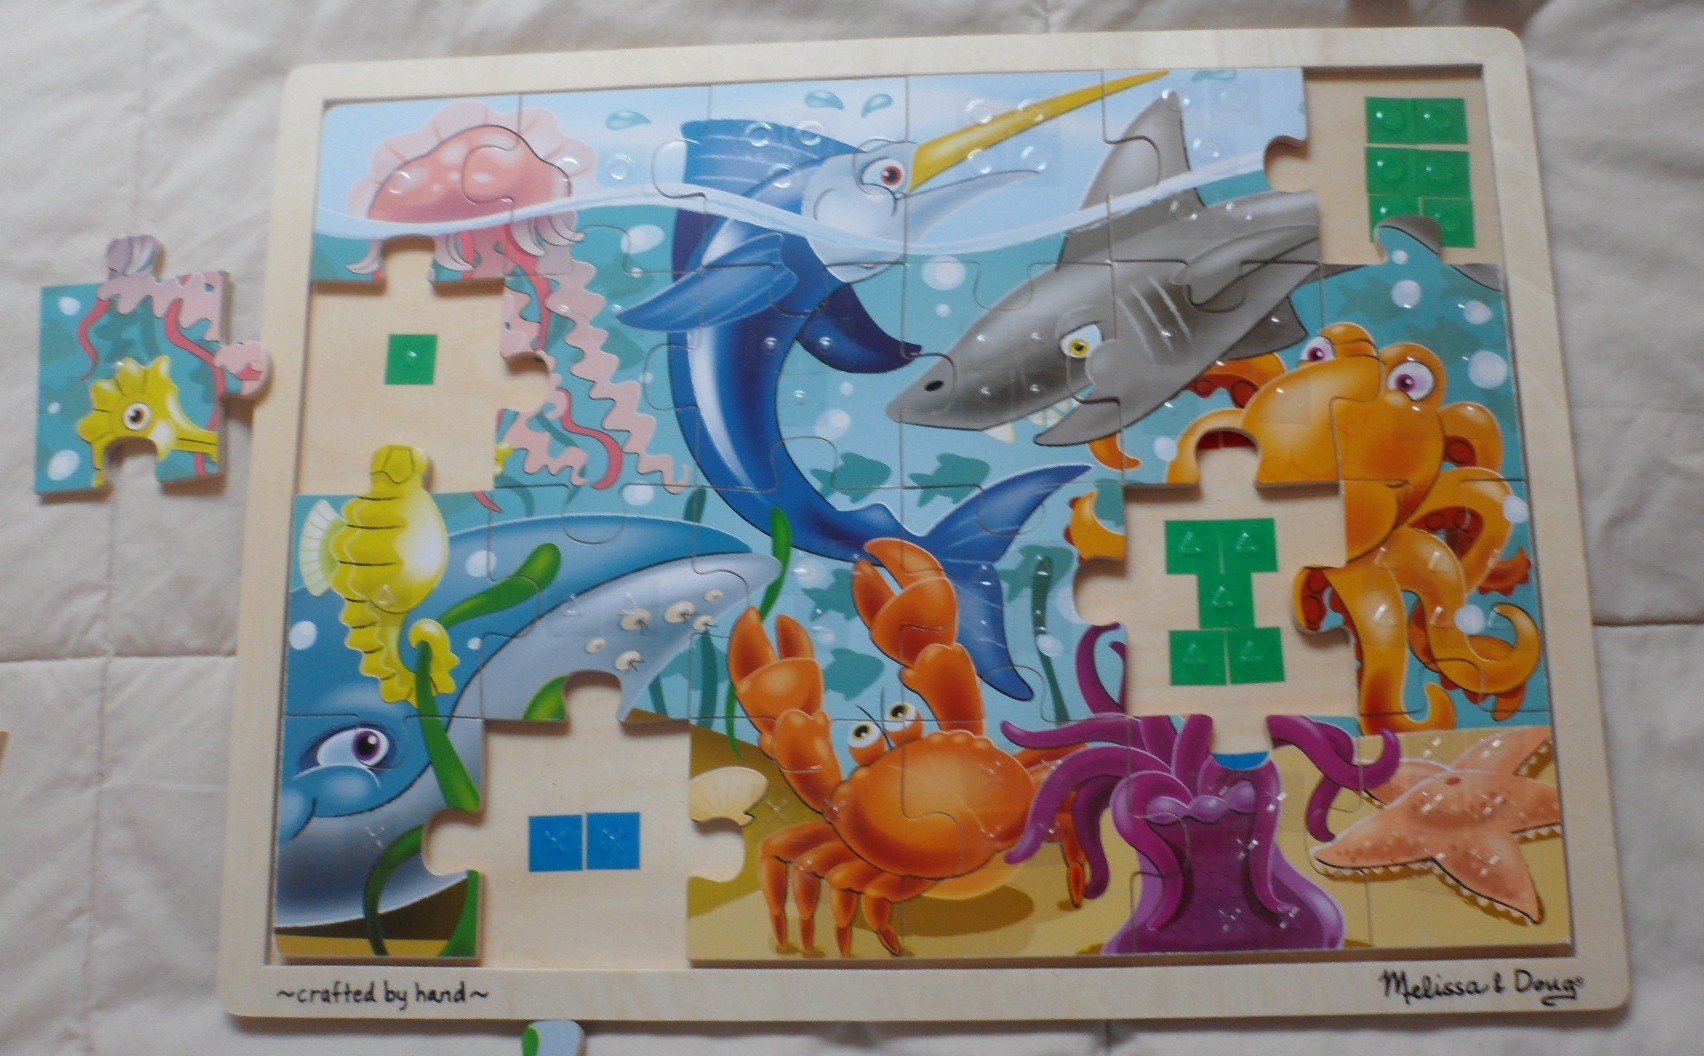 Jigsaw puzzle near completion, shows placement of tactile stickers on the frame underneath each piece.  Transparent tactile symbols on jigsaw picture are faintly visible.